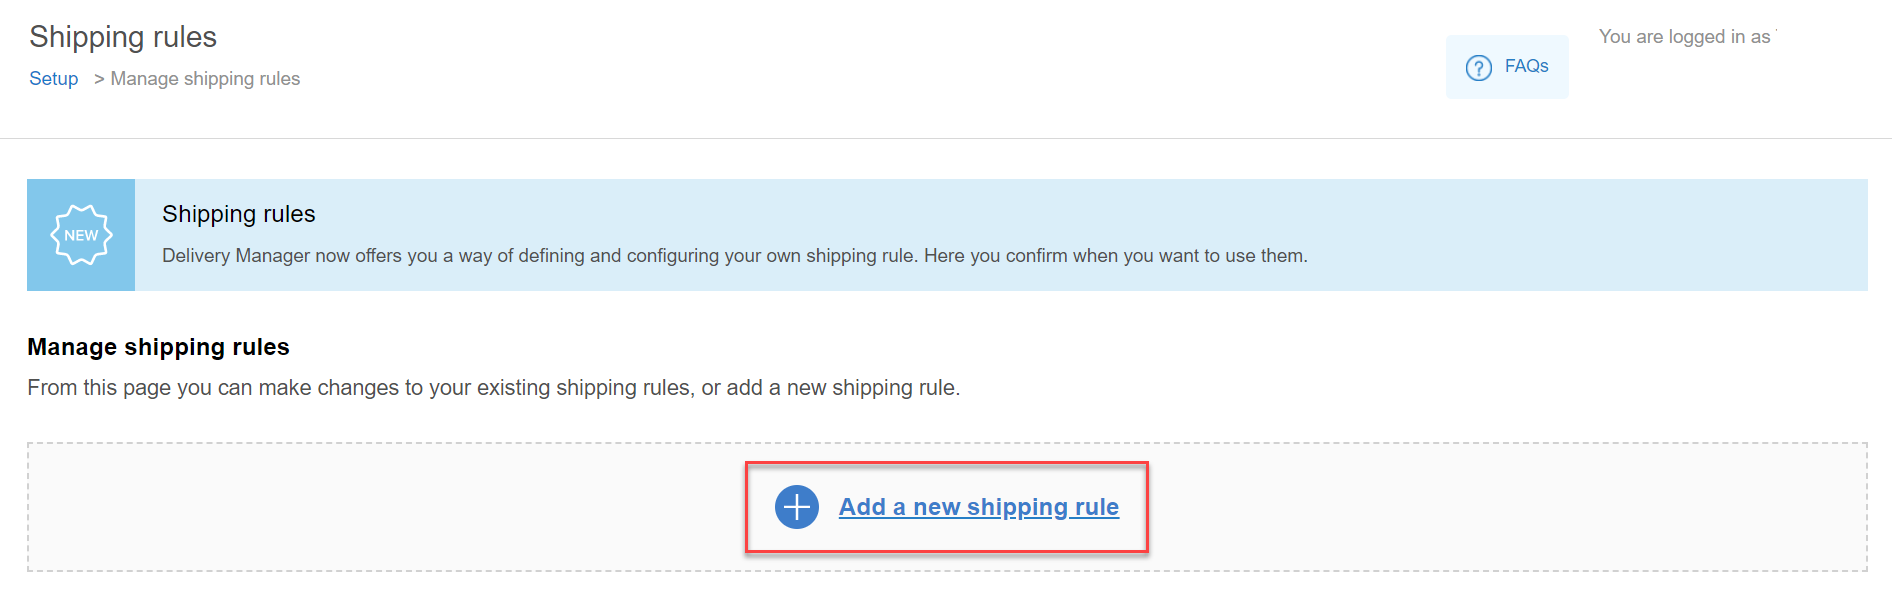 Shipping_rules_-_add_a_new_shipping_rule.png